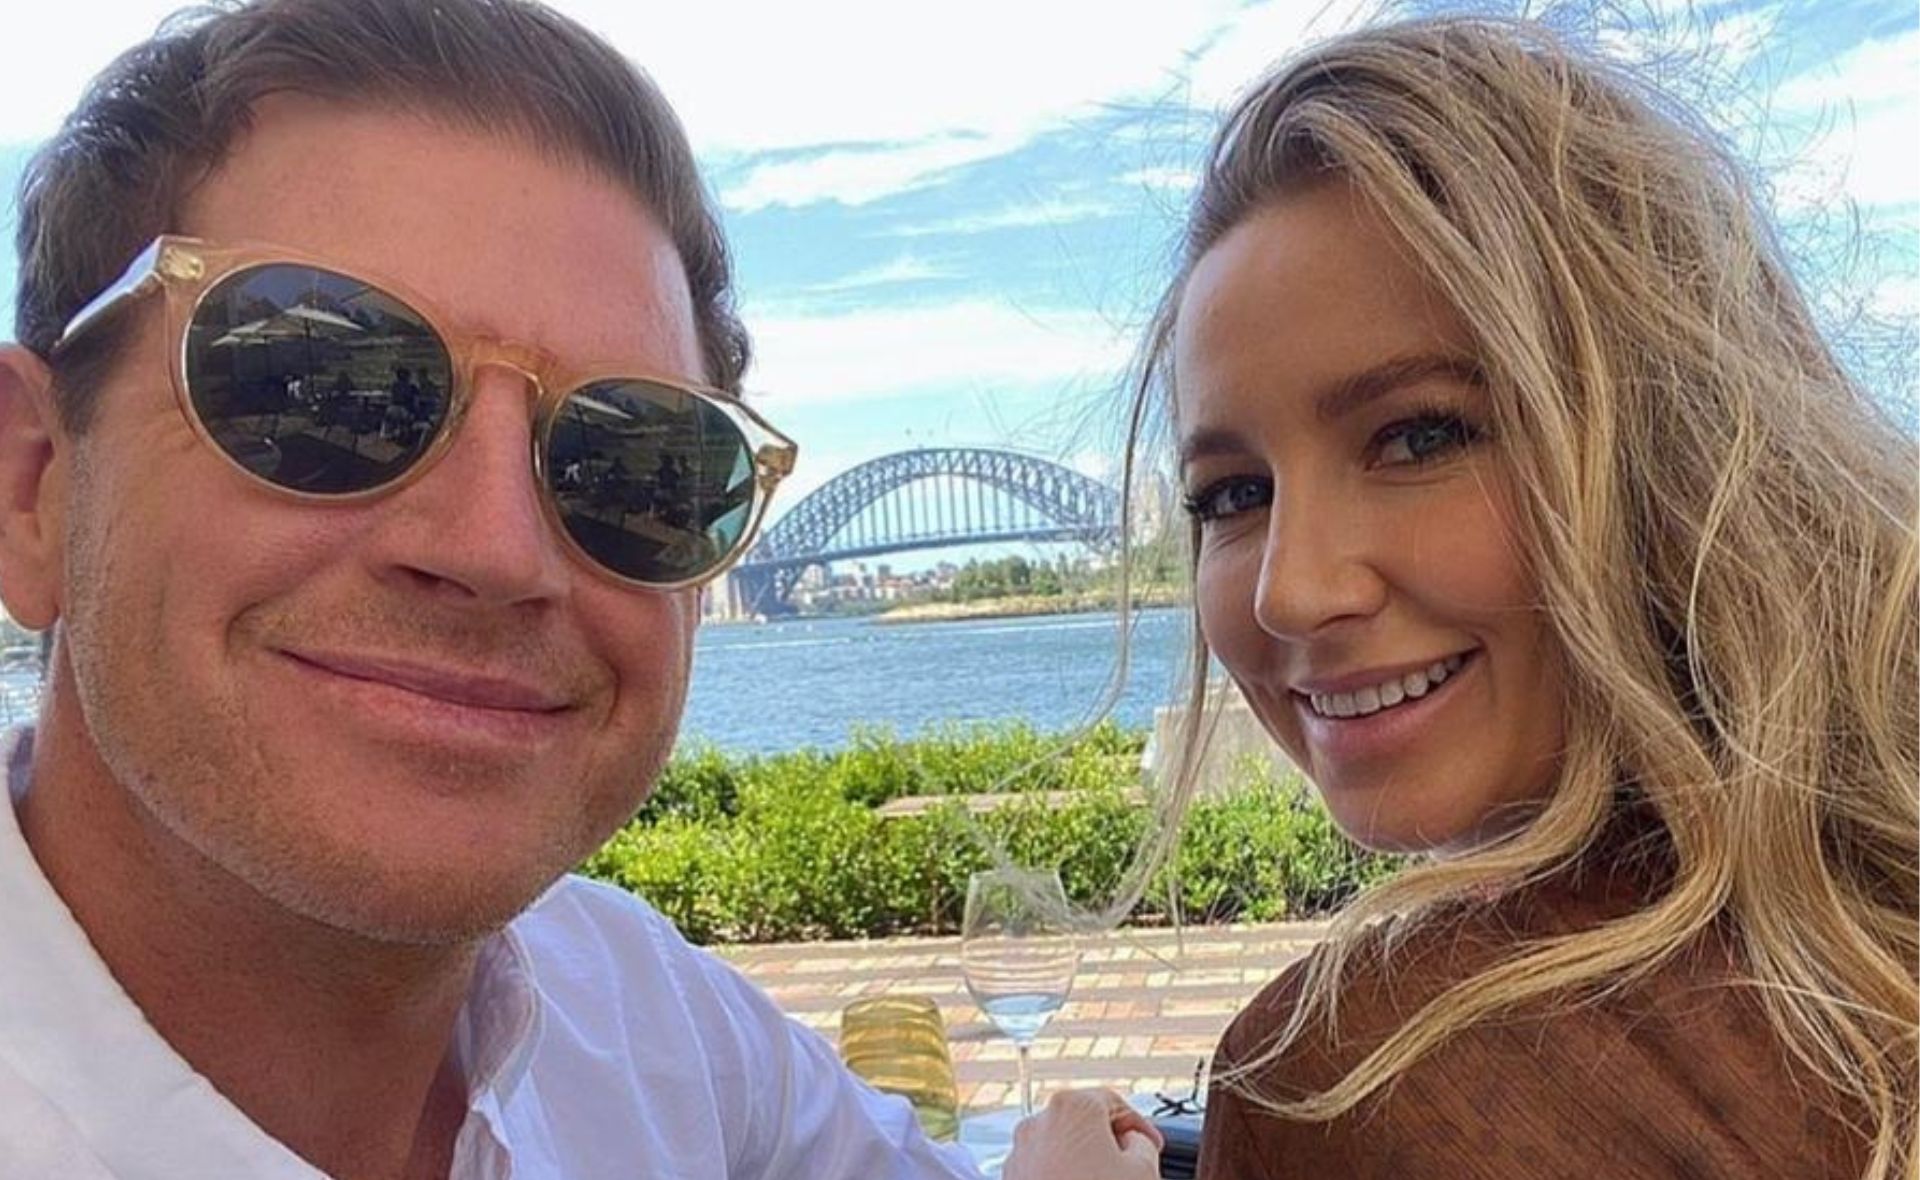 Sunrise’s Sam Mac has penned a touching love letter to his partner Rebecca